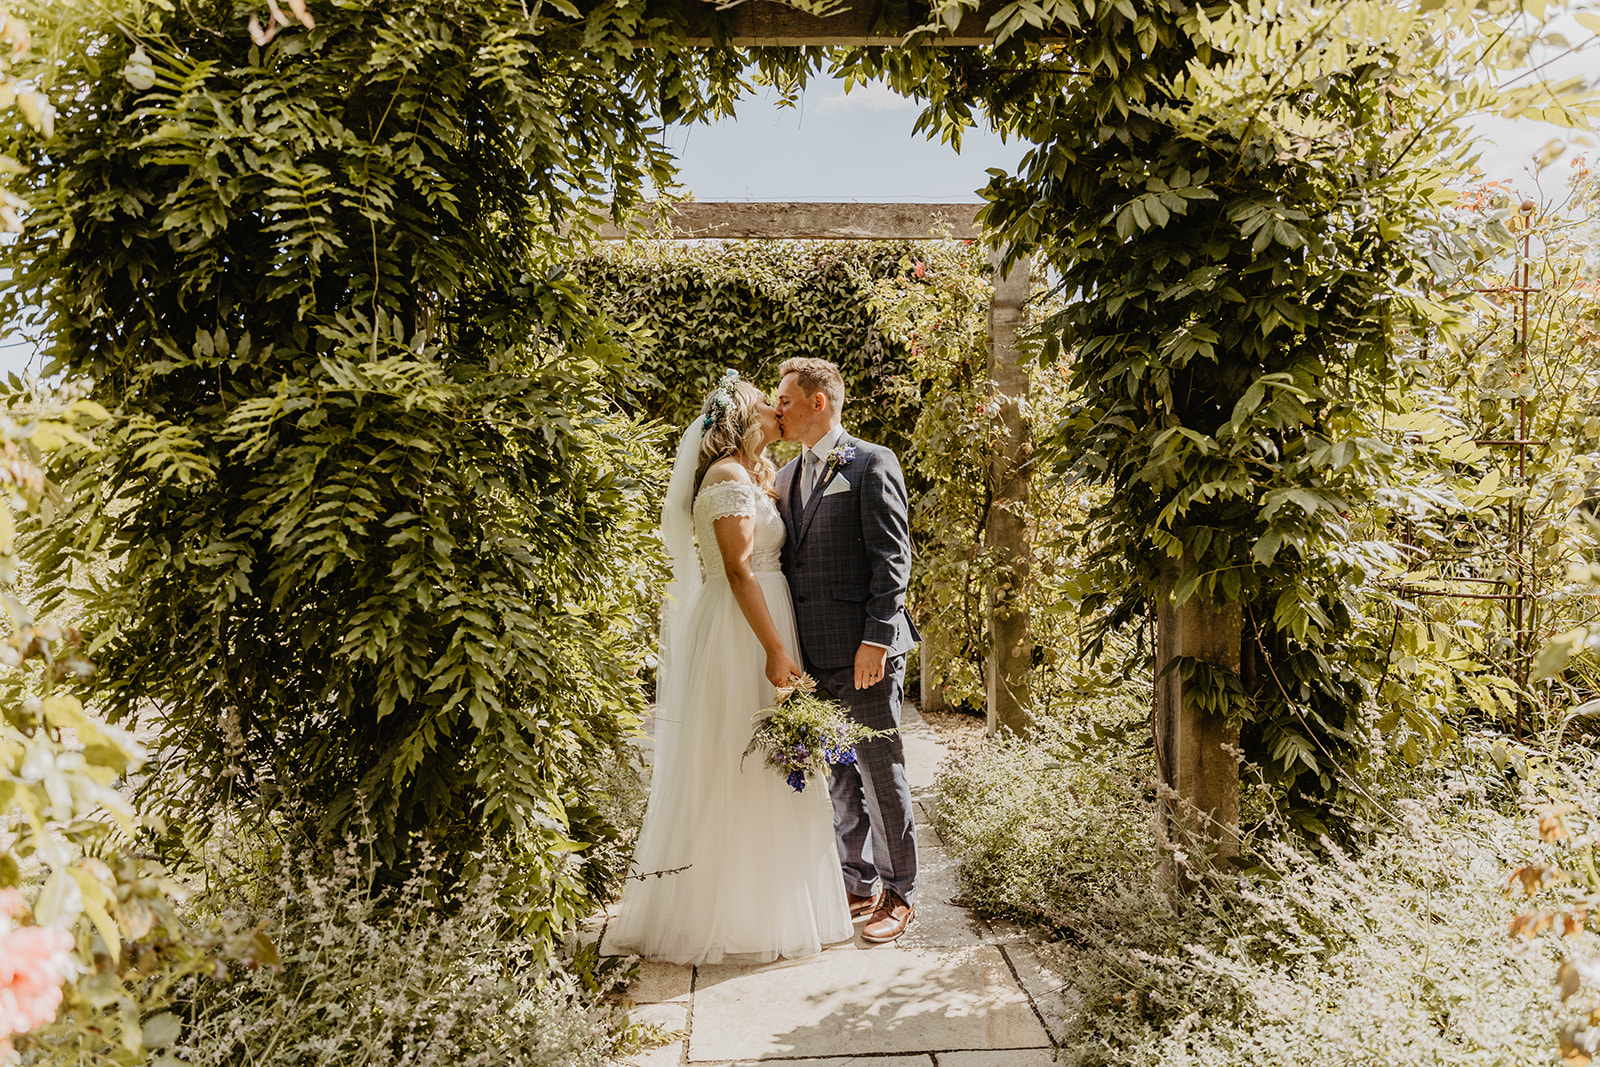 Bride and groom at Field Place Wedding Worthing, Sussex. By OliveJoy Photography.